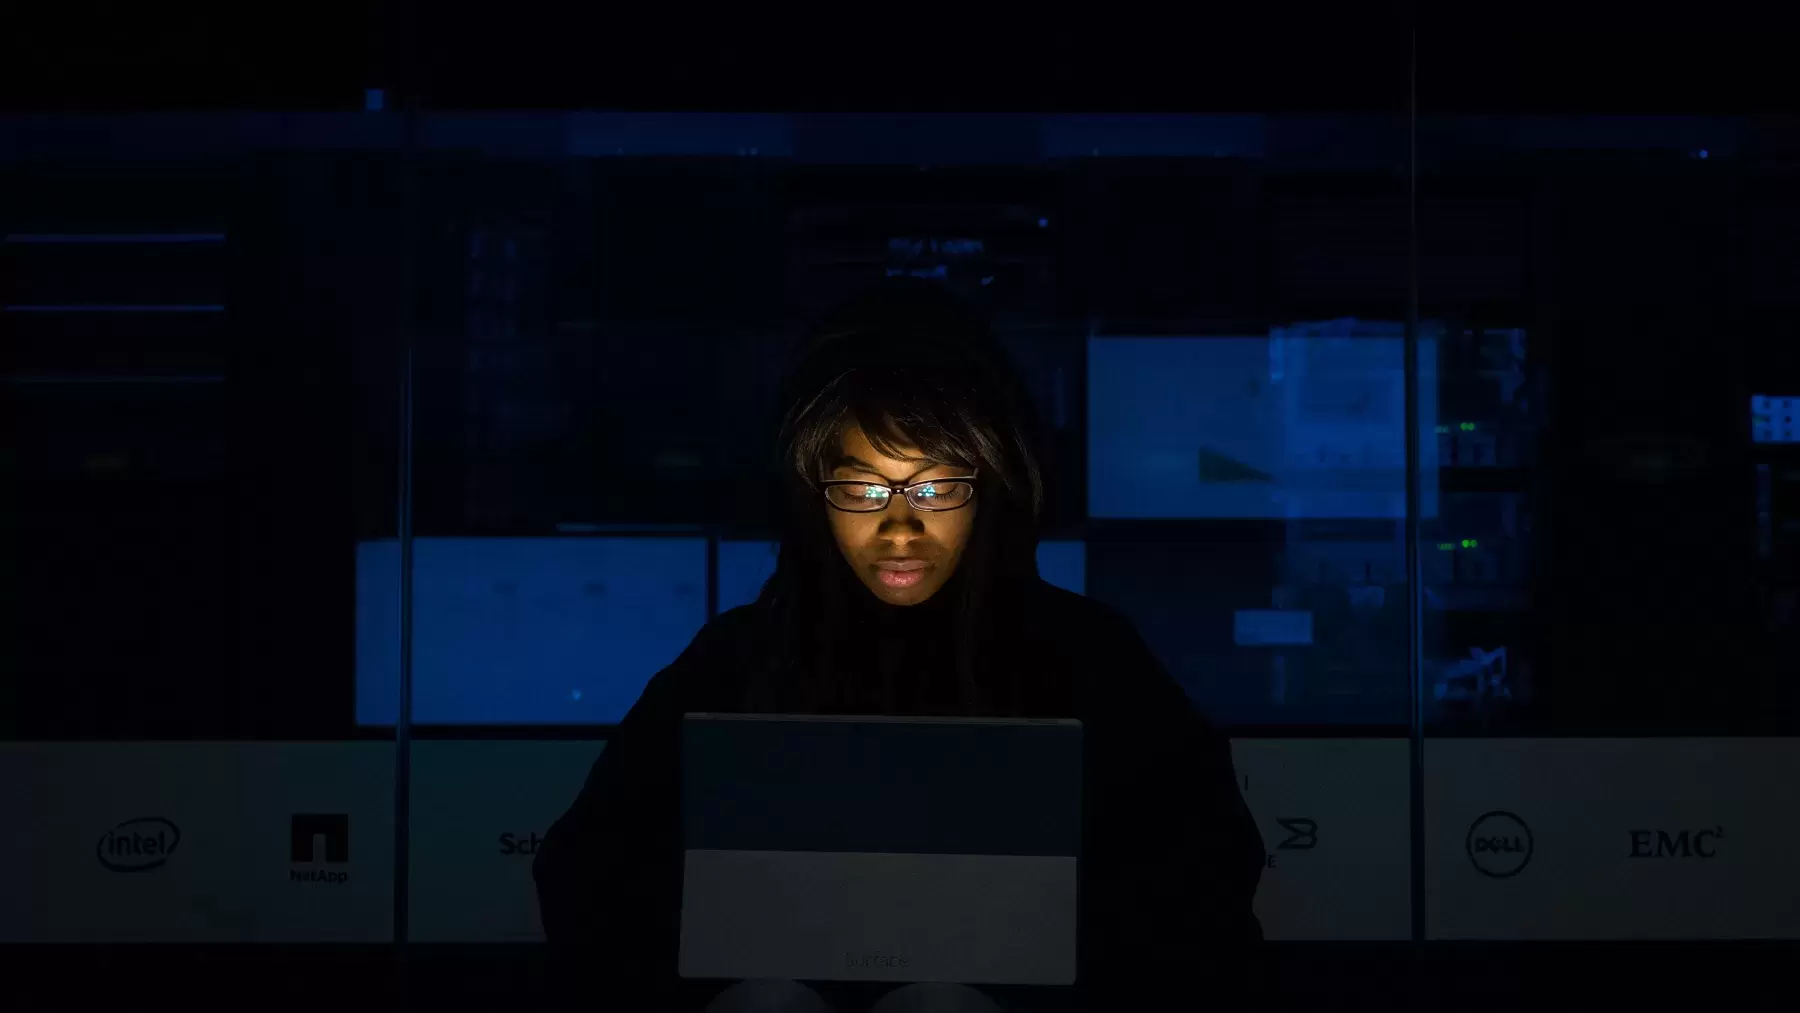 person looks at computer screen in a dark room